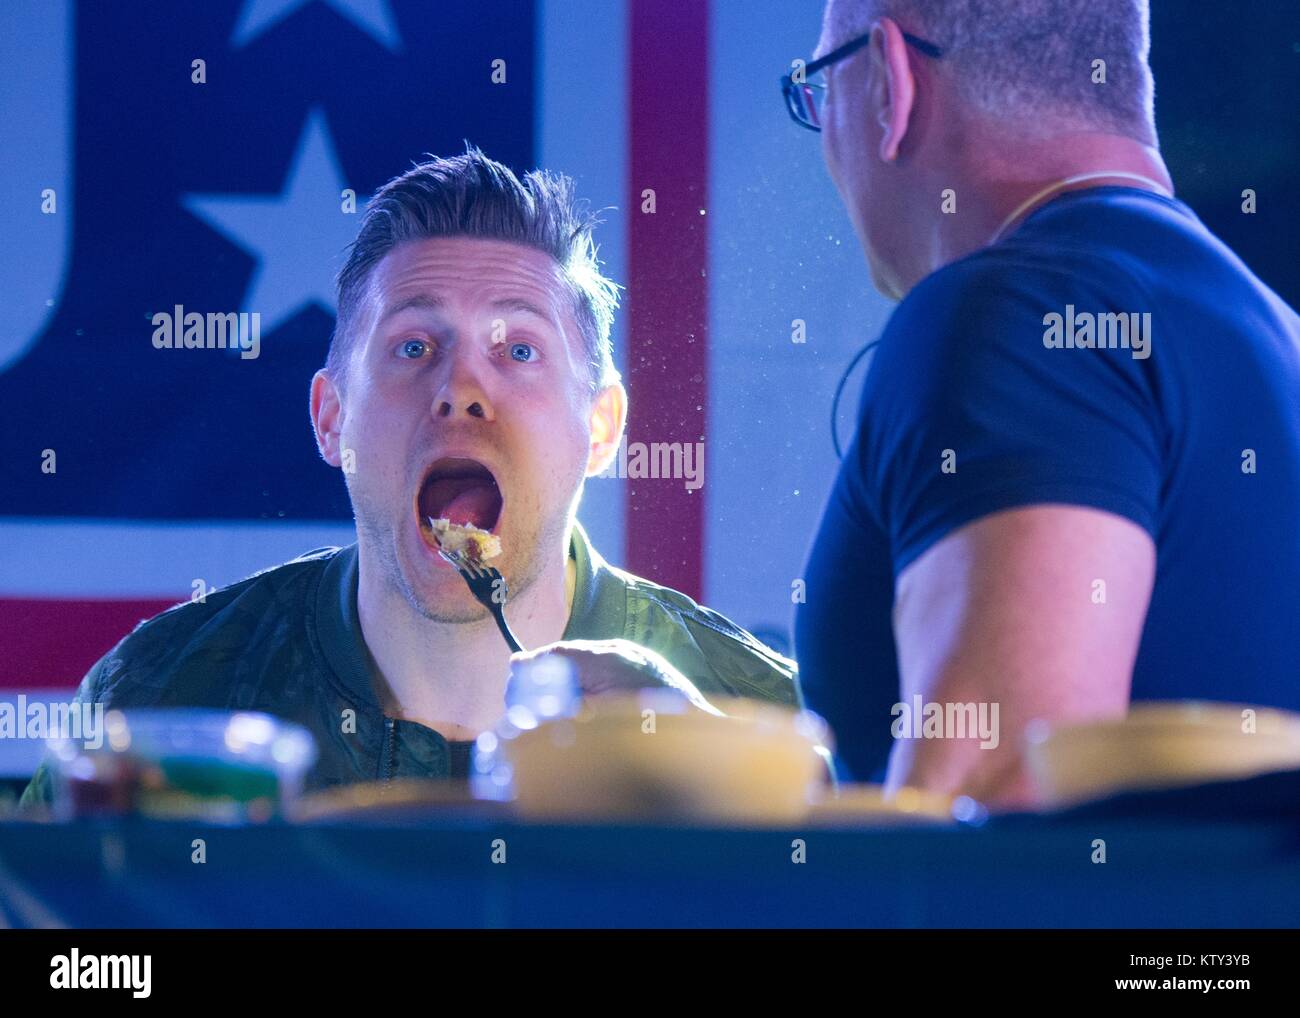 Professional chef Robert Irvine feeds World Wrestling Entertainment (WWE) wrestler The Miz (Michael Mizanin) during a cooking demonstration for U.S. soldiers for the USO Holiday Tour at the Moron Air Base December 21, 2017 in Sevilla, Spain. Stock Photo